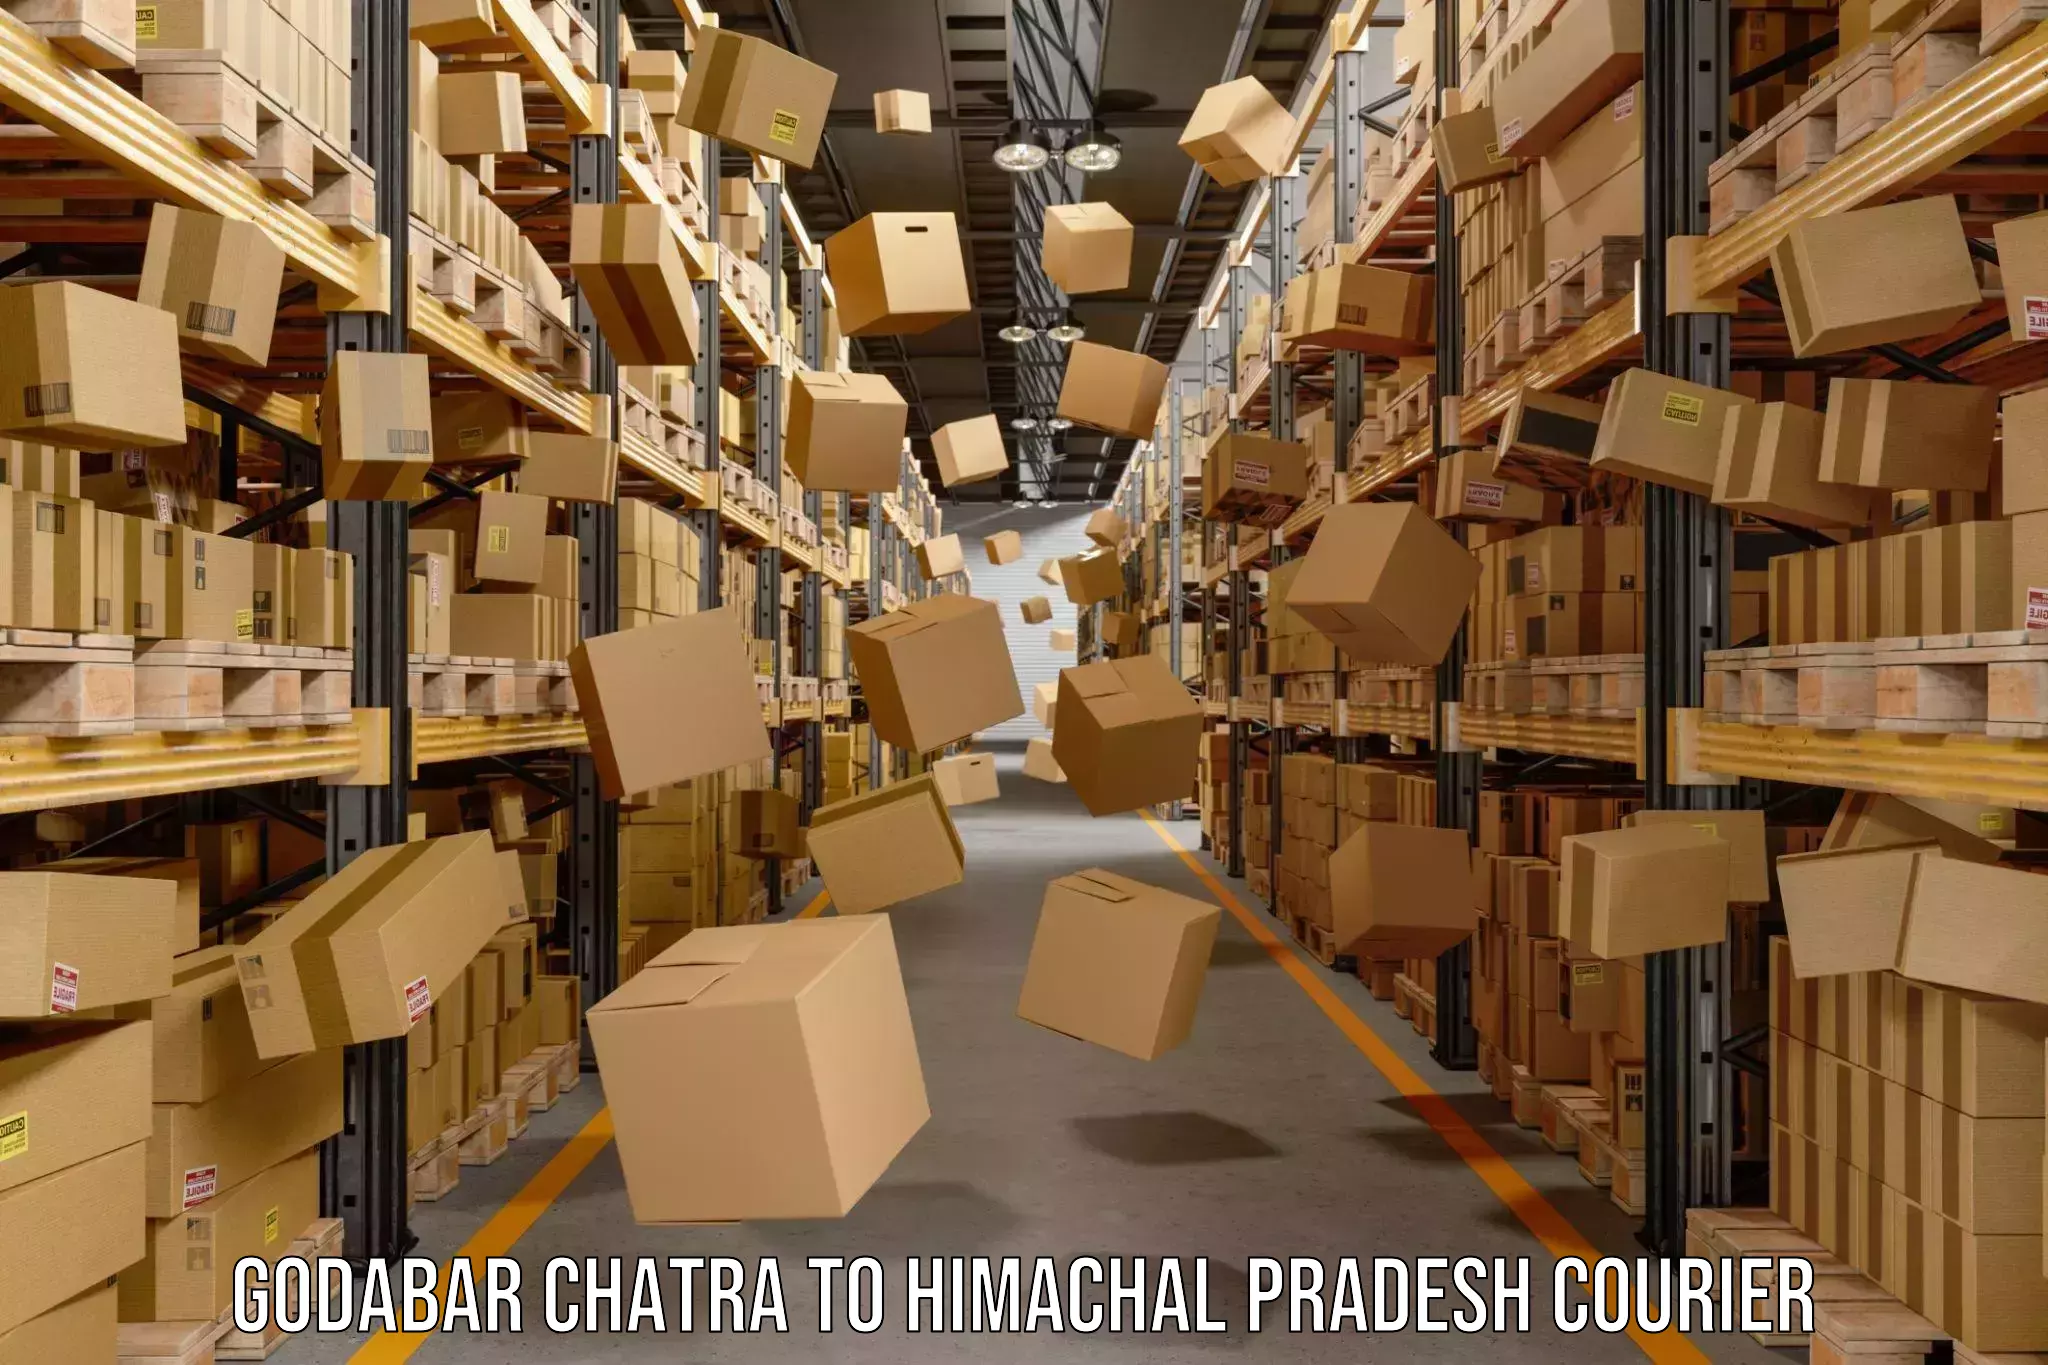 State-of-the-art courier technology Godabar Chatra to Sirmaur